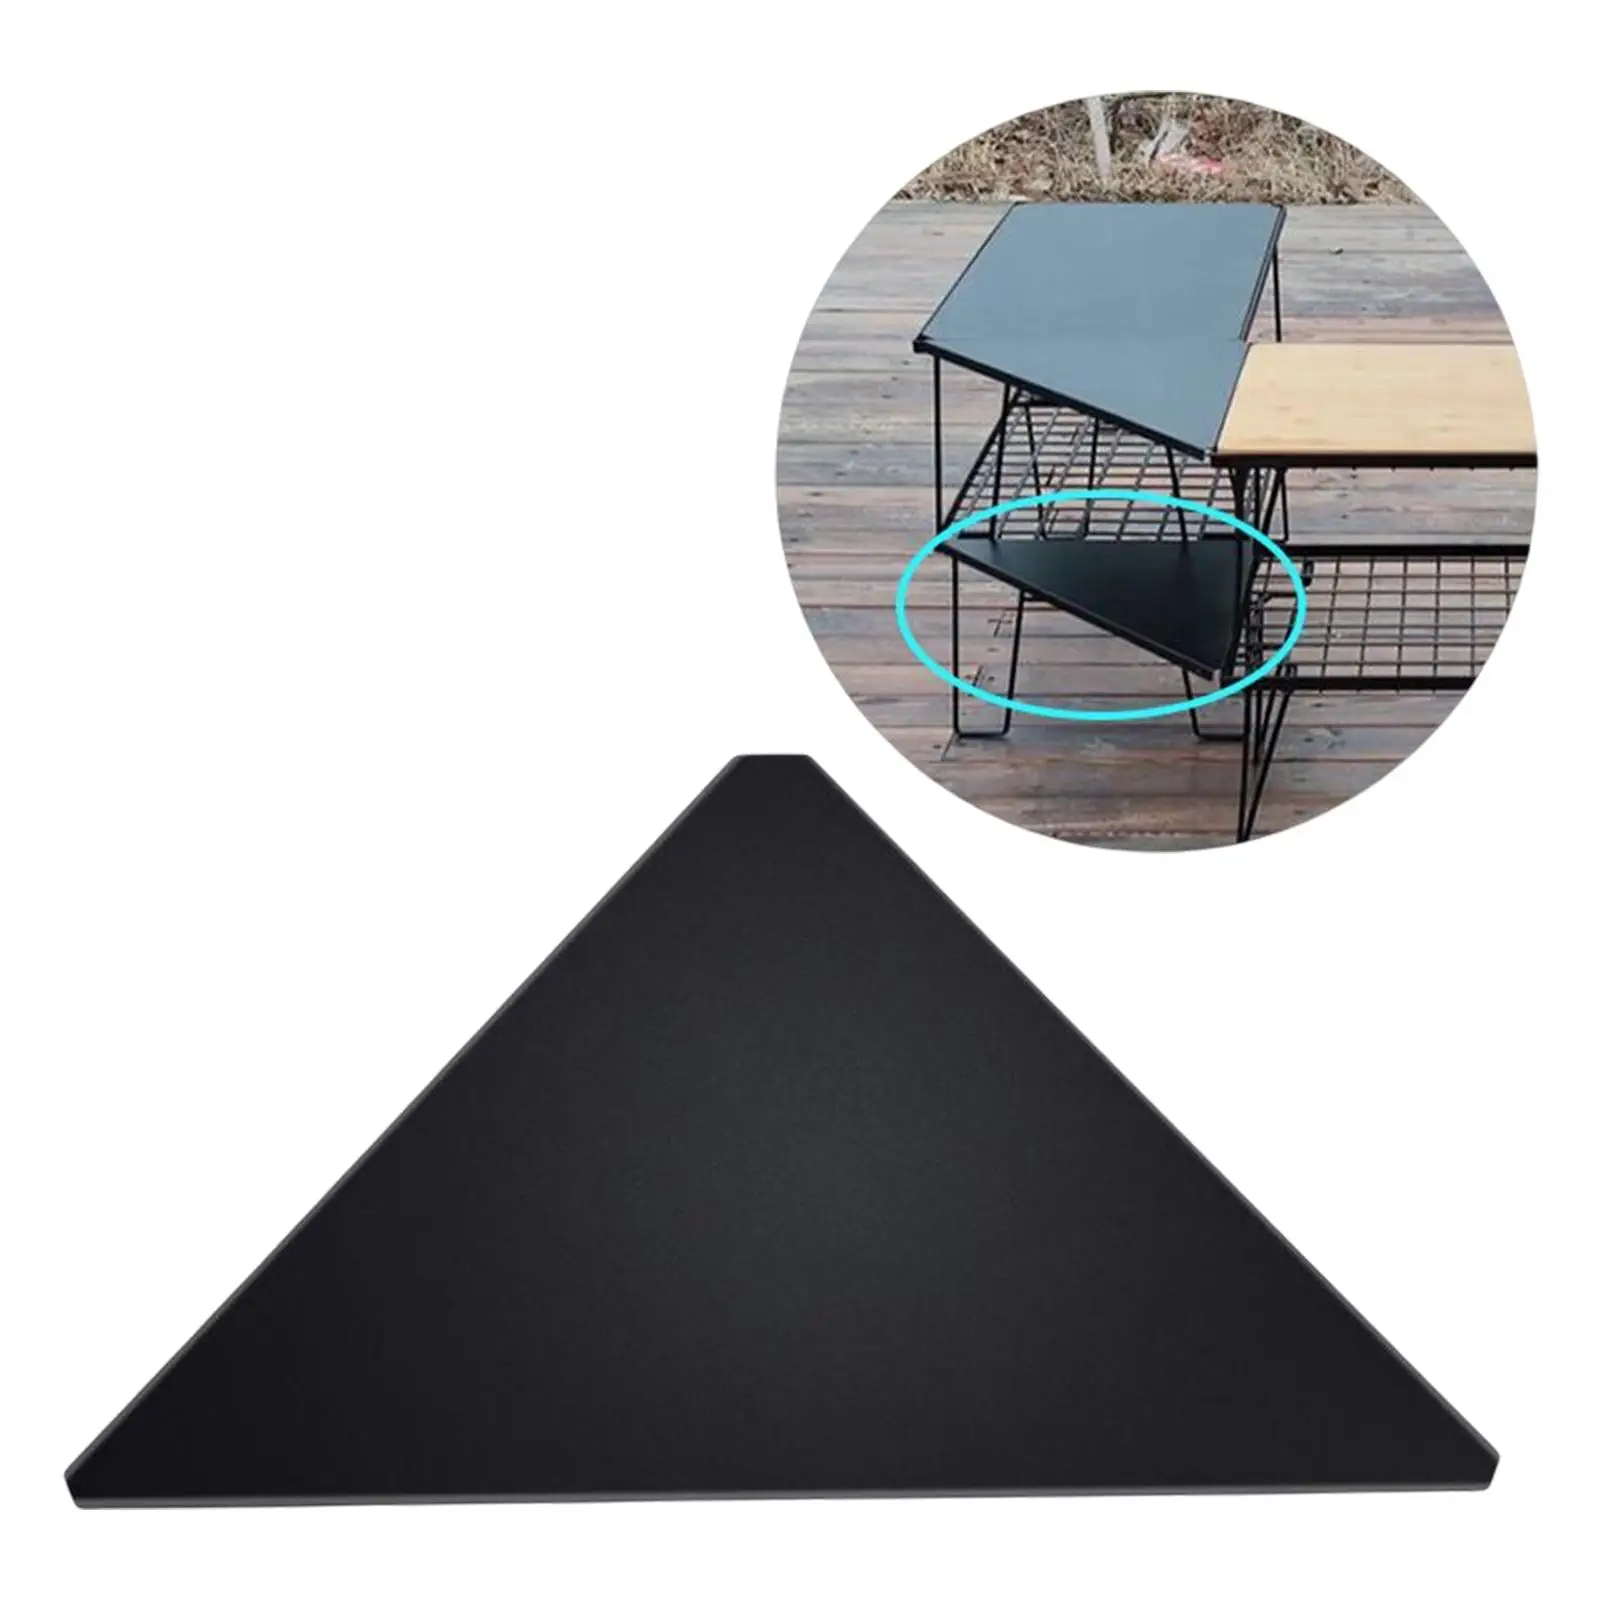 Camping Table Board Outdoor Matching with Iron Net Table Durable Stainless Steel Desk Board for Hiking Mountaineering Beach BBQ